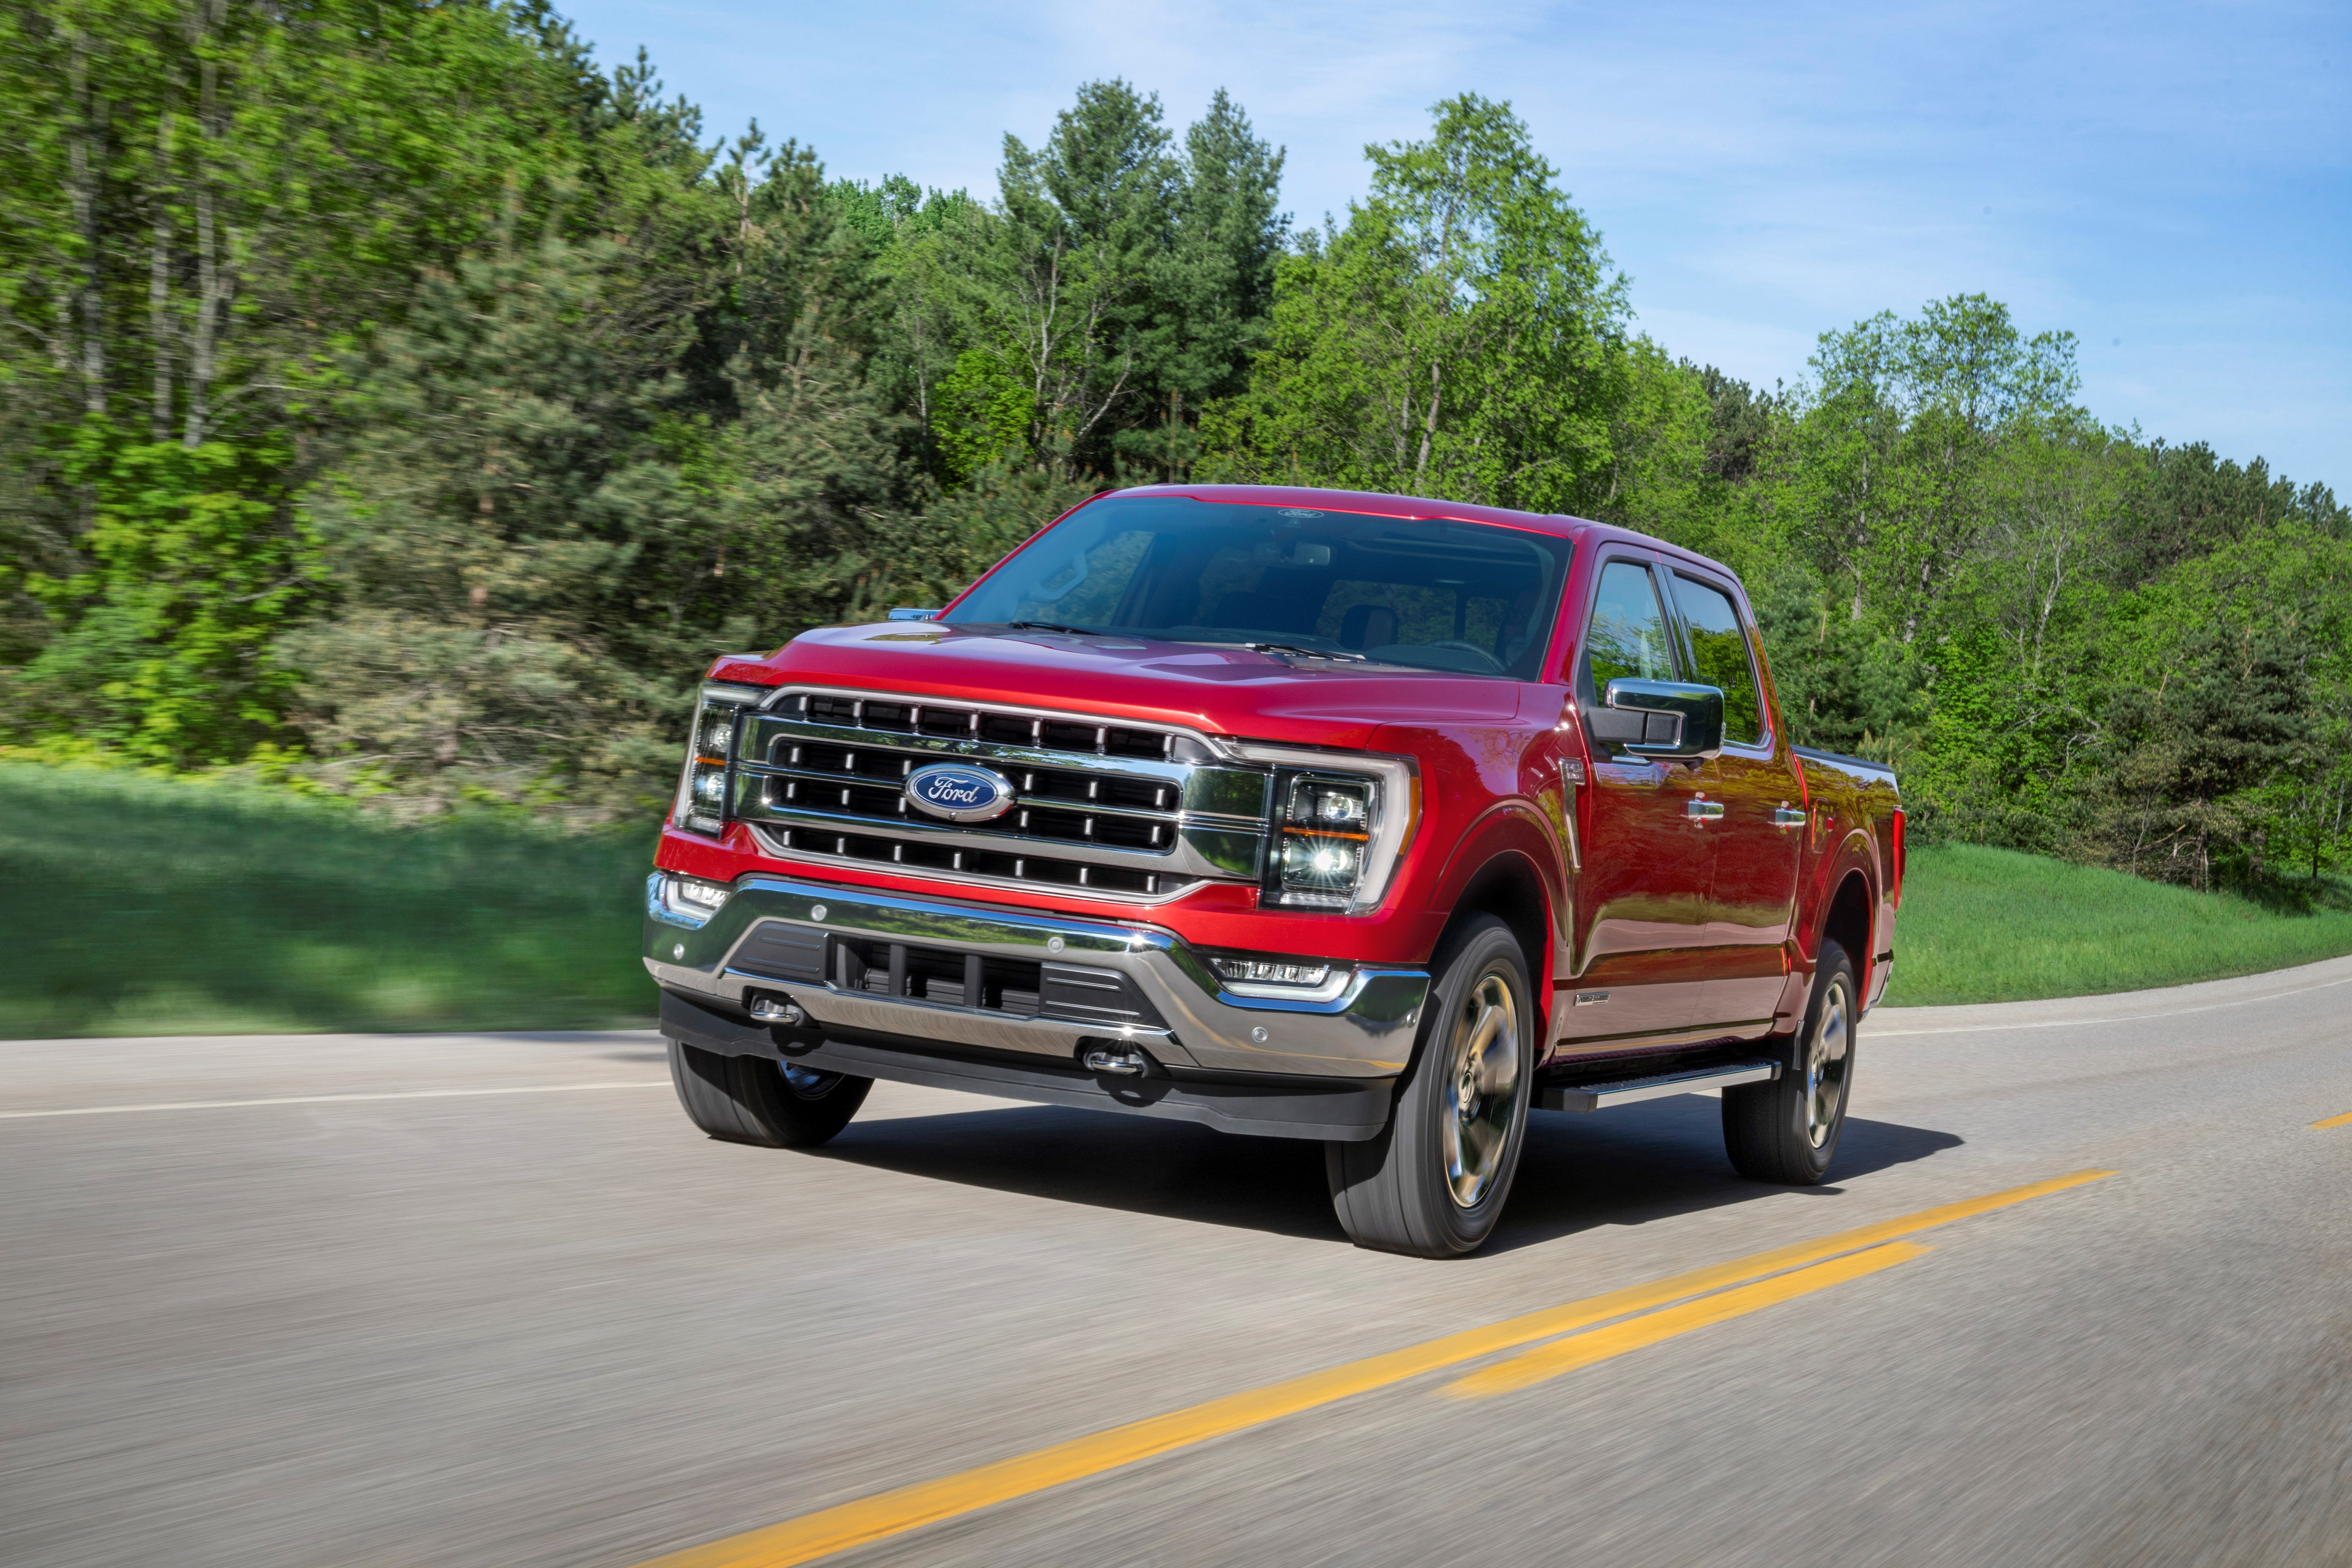 New King of the Road-2021 Ford F-150 Arrives